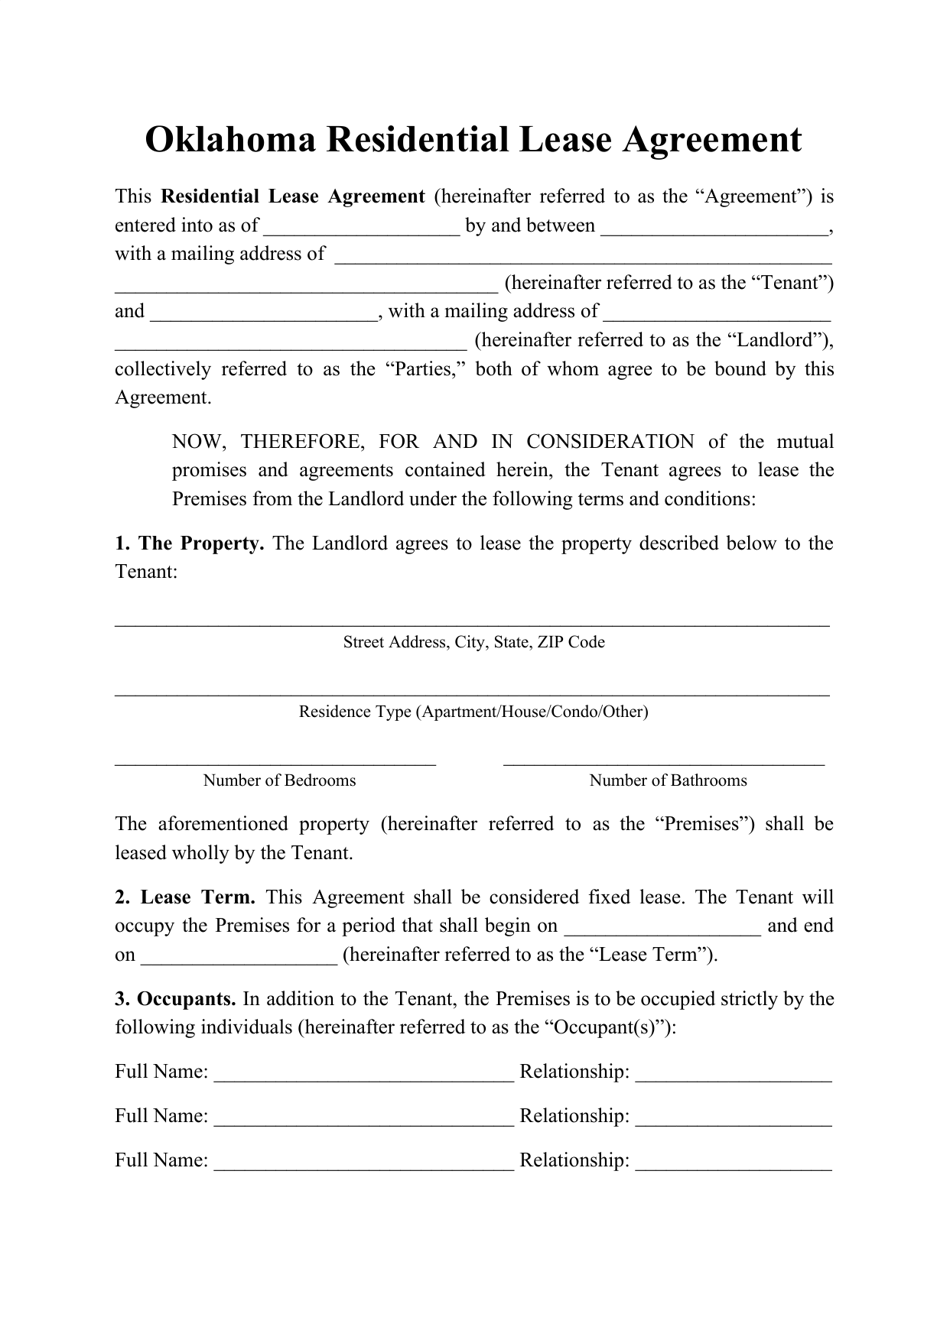 Oklahoma Residential Lease Agreement Template Fill Out Sign Online